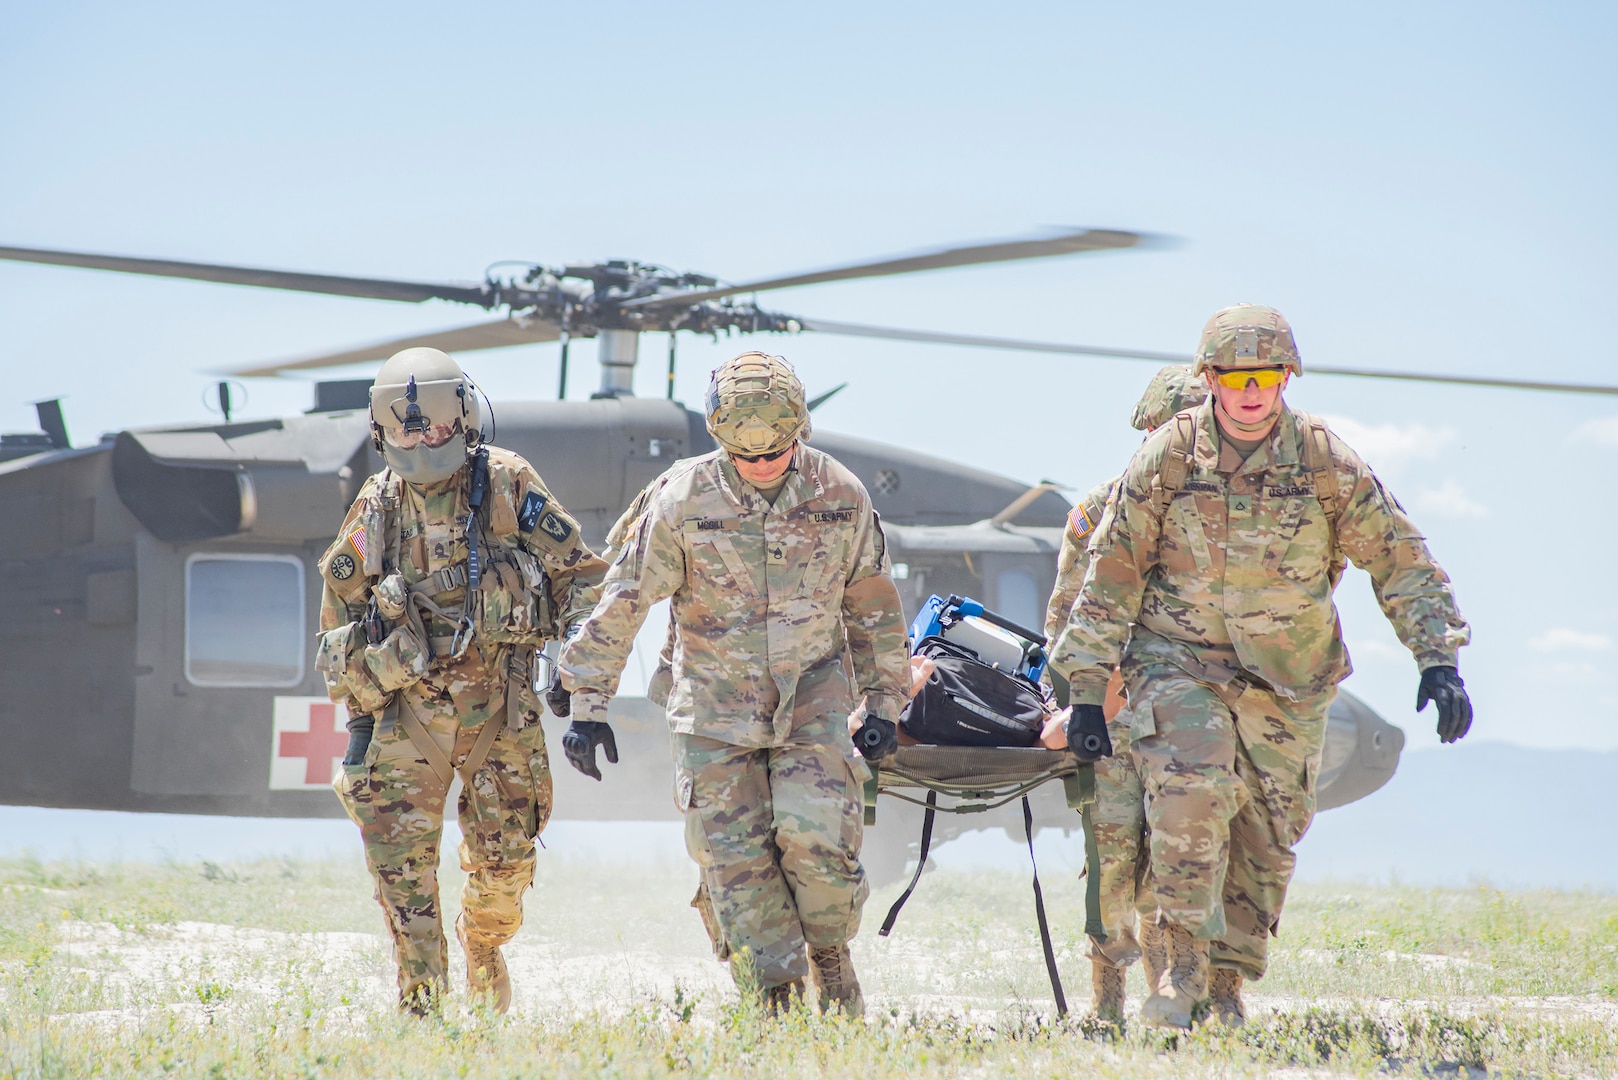 Members of the Idaho Army National Guard’s Headquarters and Headquarters Battery, 1st of the 148th Field Artillery Regiment, conduct air medical evacuation and casualty treatment with members of Detachment 1, Company Golf, 1st of the 168th General Support Aviation Battalion, at the Orchard Combat Training Center May 17, 2022.